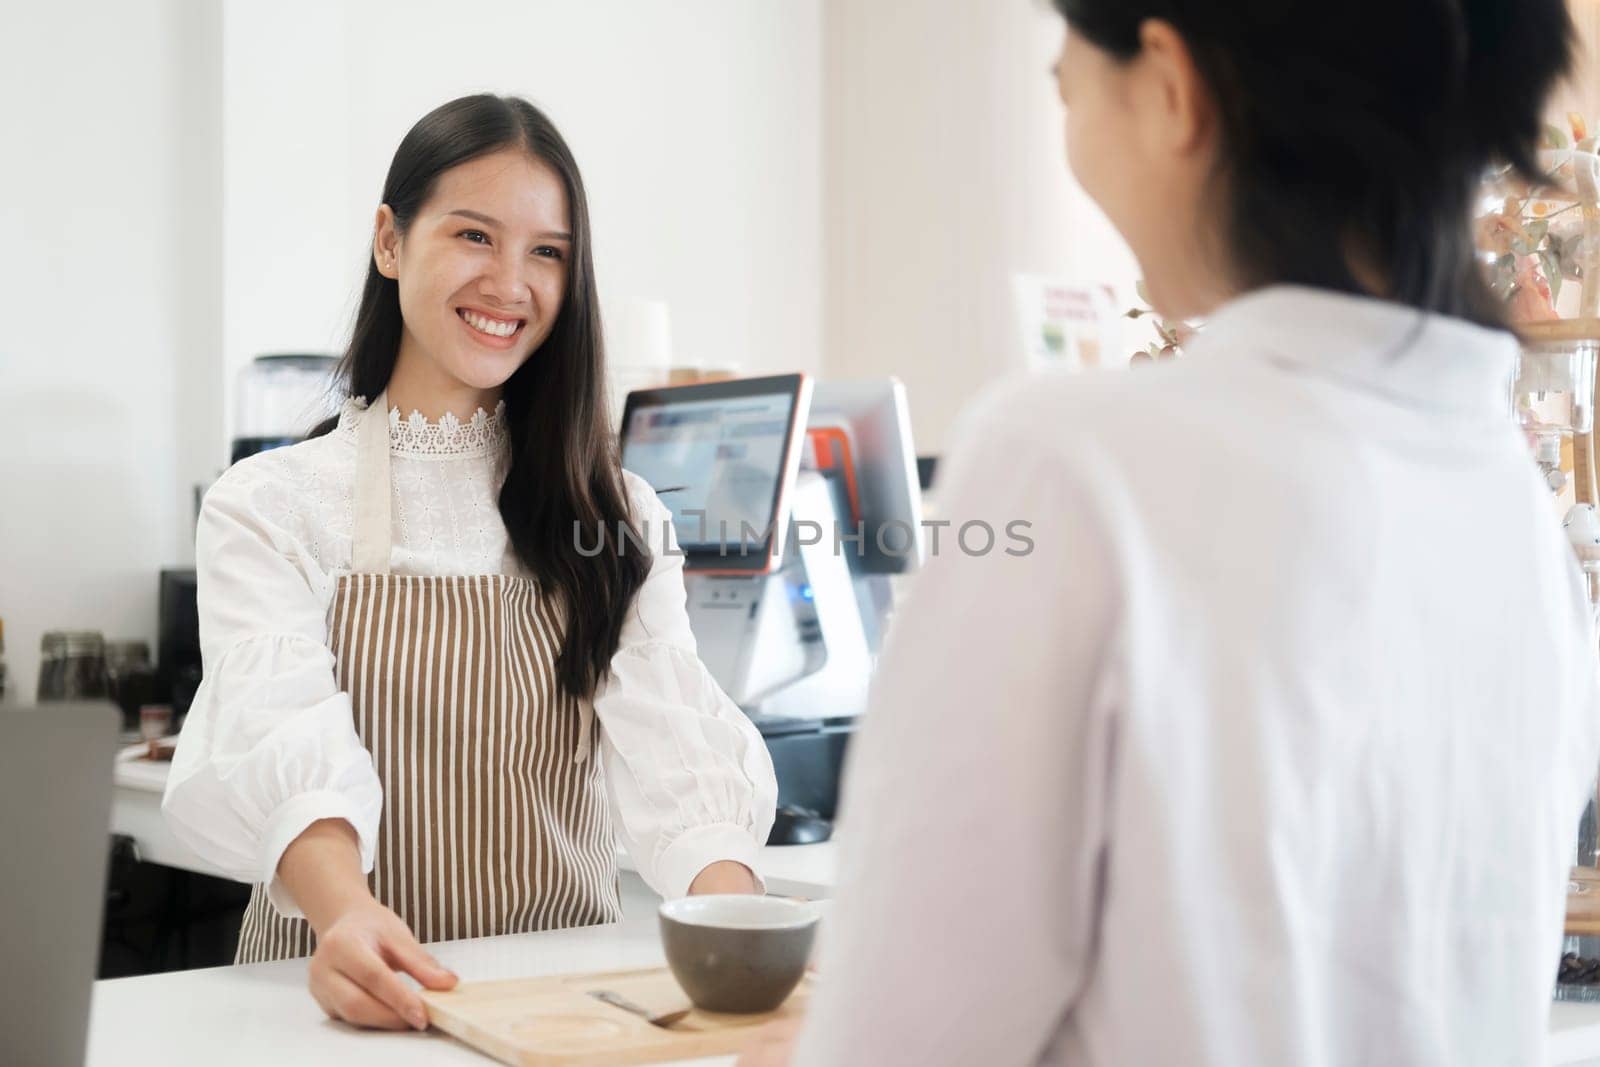 Coffee shop owner handing over a sealed coffee cup to a customer. Woman serving customer with a smile at a coffee shop. Smiling friendly barista serving a cup of coffe to customer at coffee shop. Coffee small business concept.